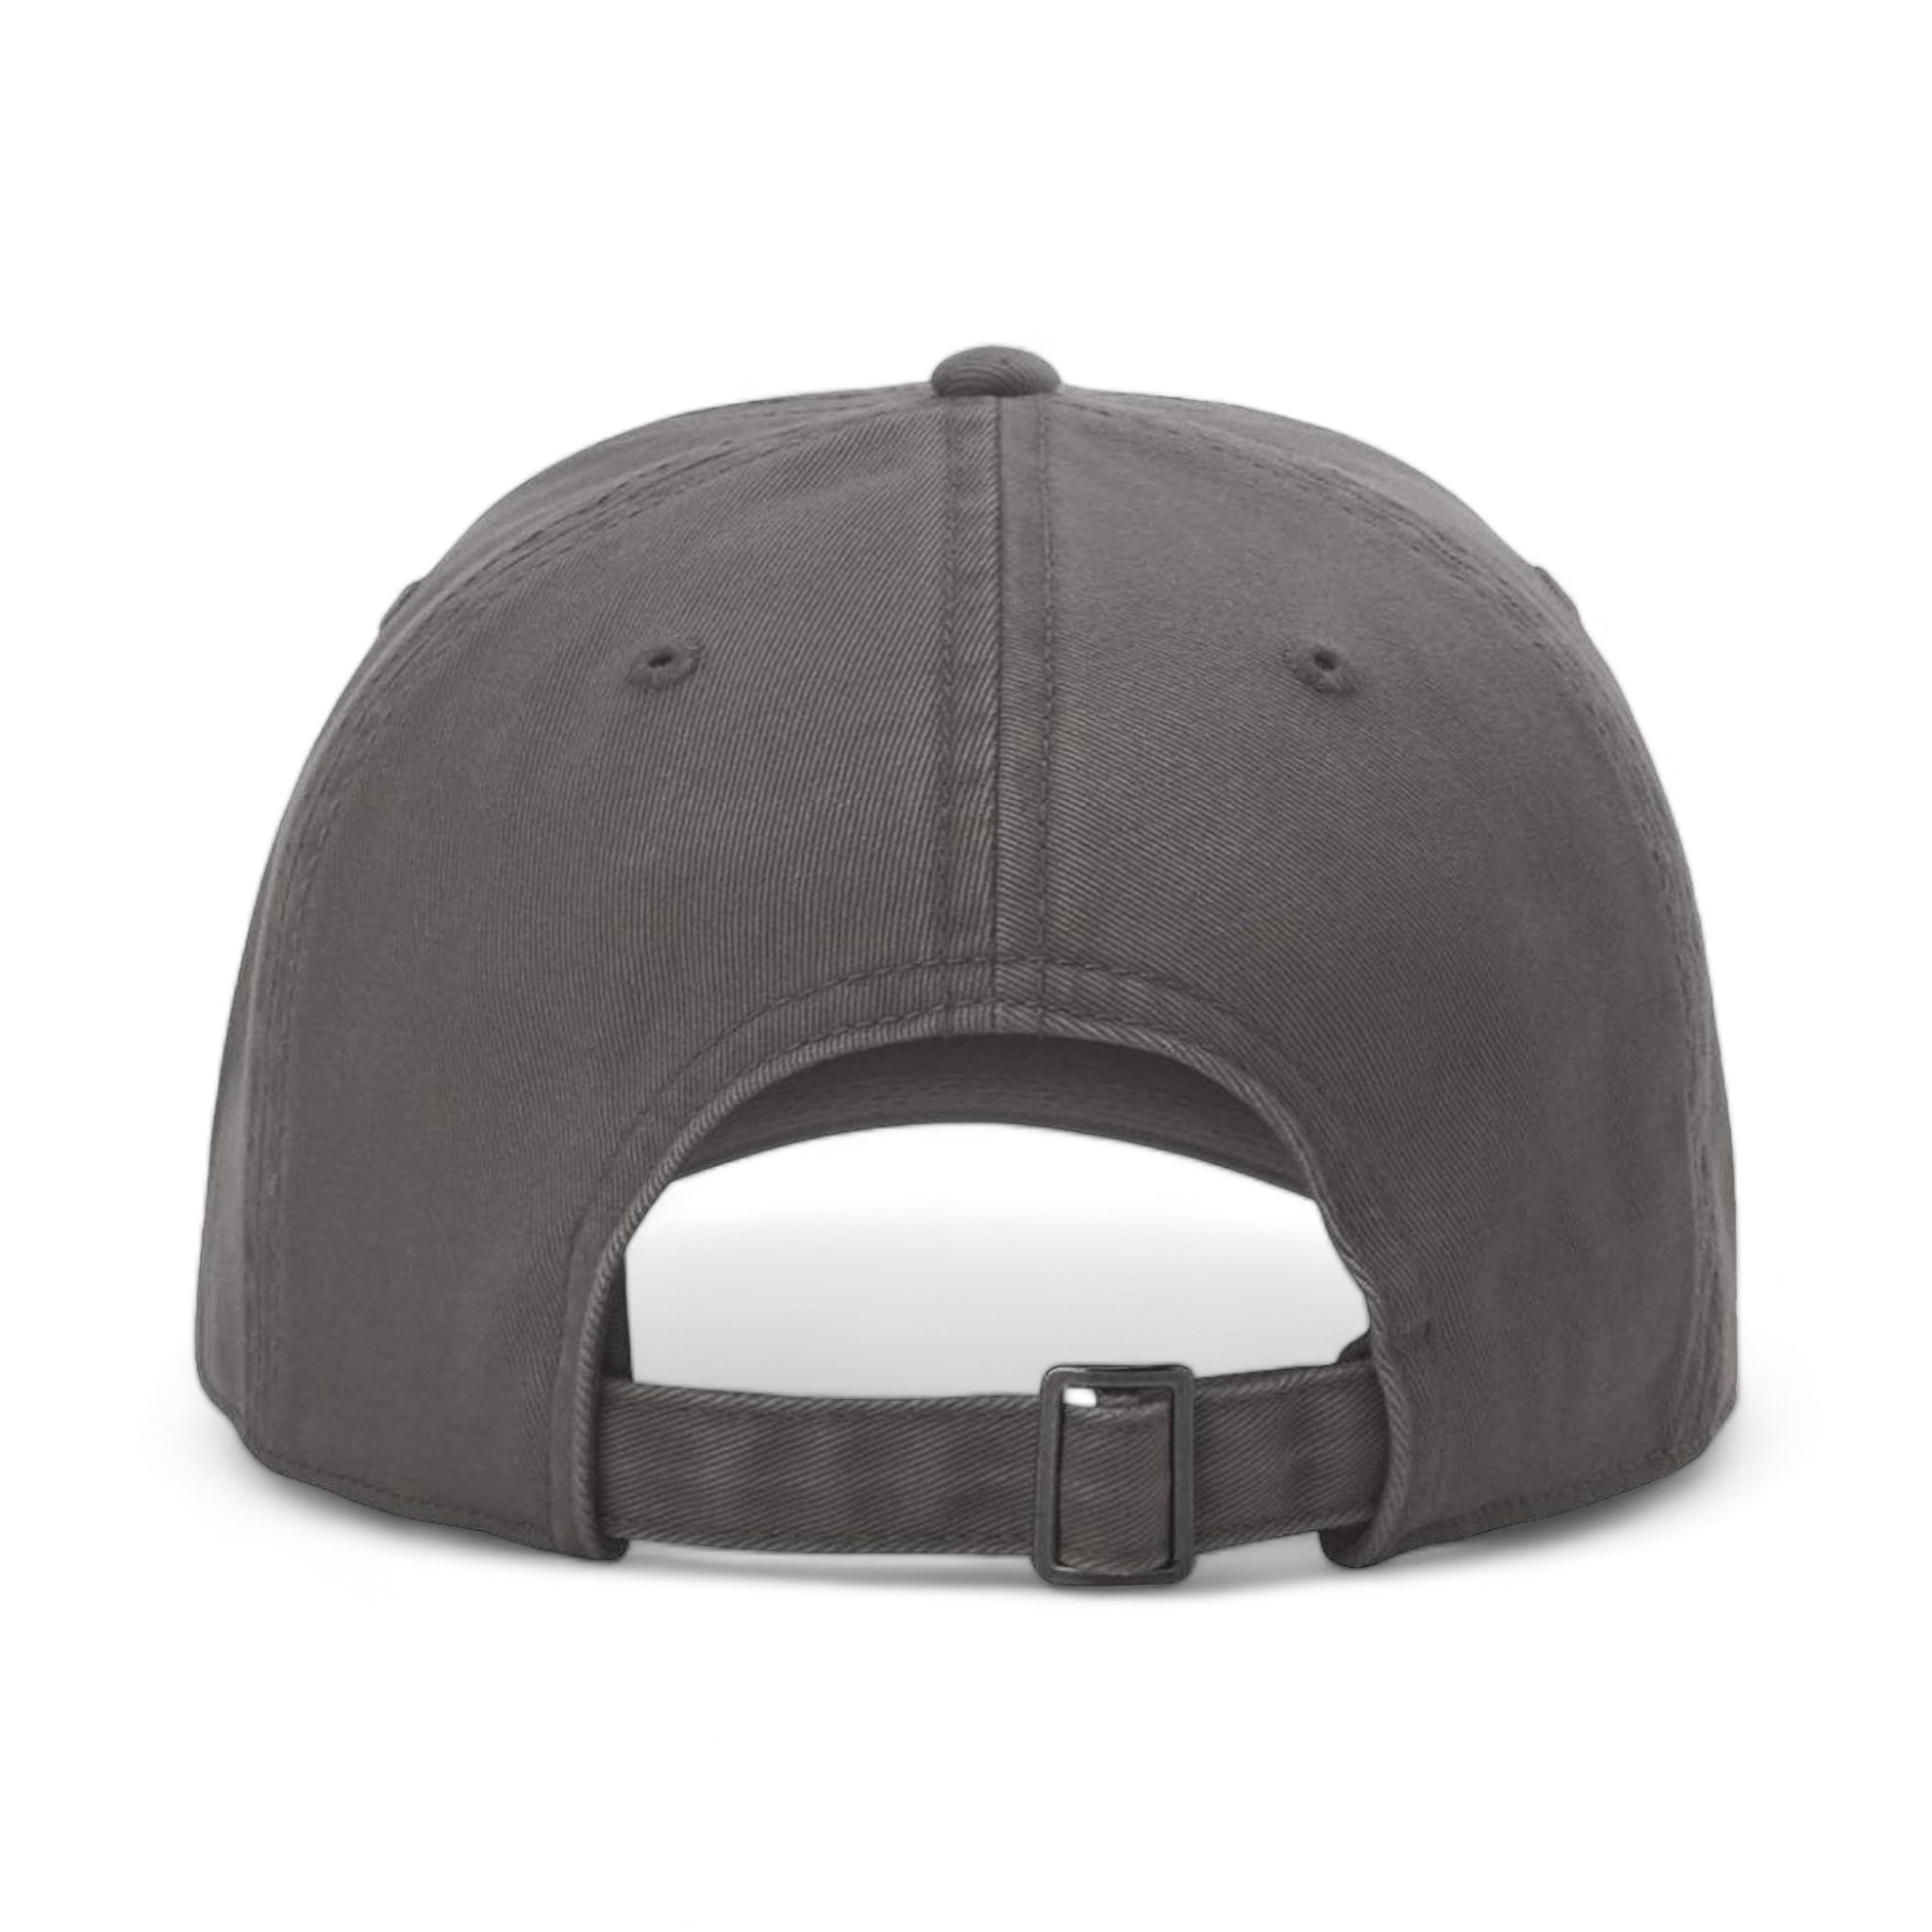 Back view of Richardson 326 custom hat in charcoal